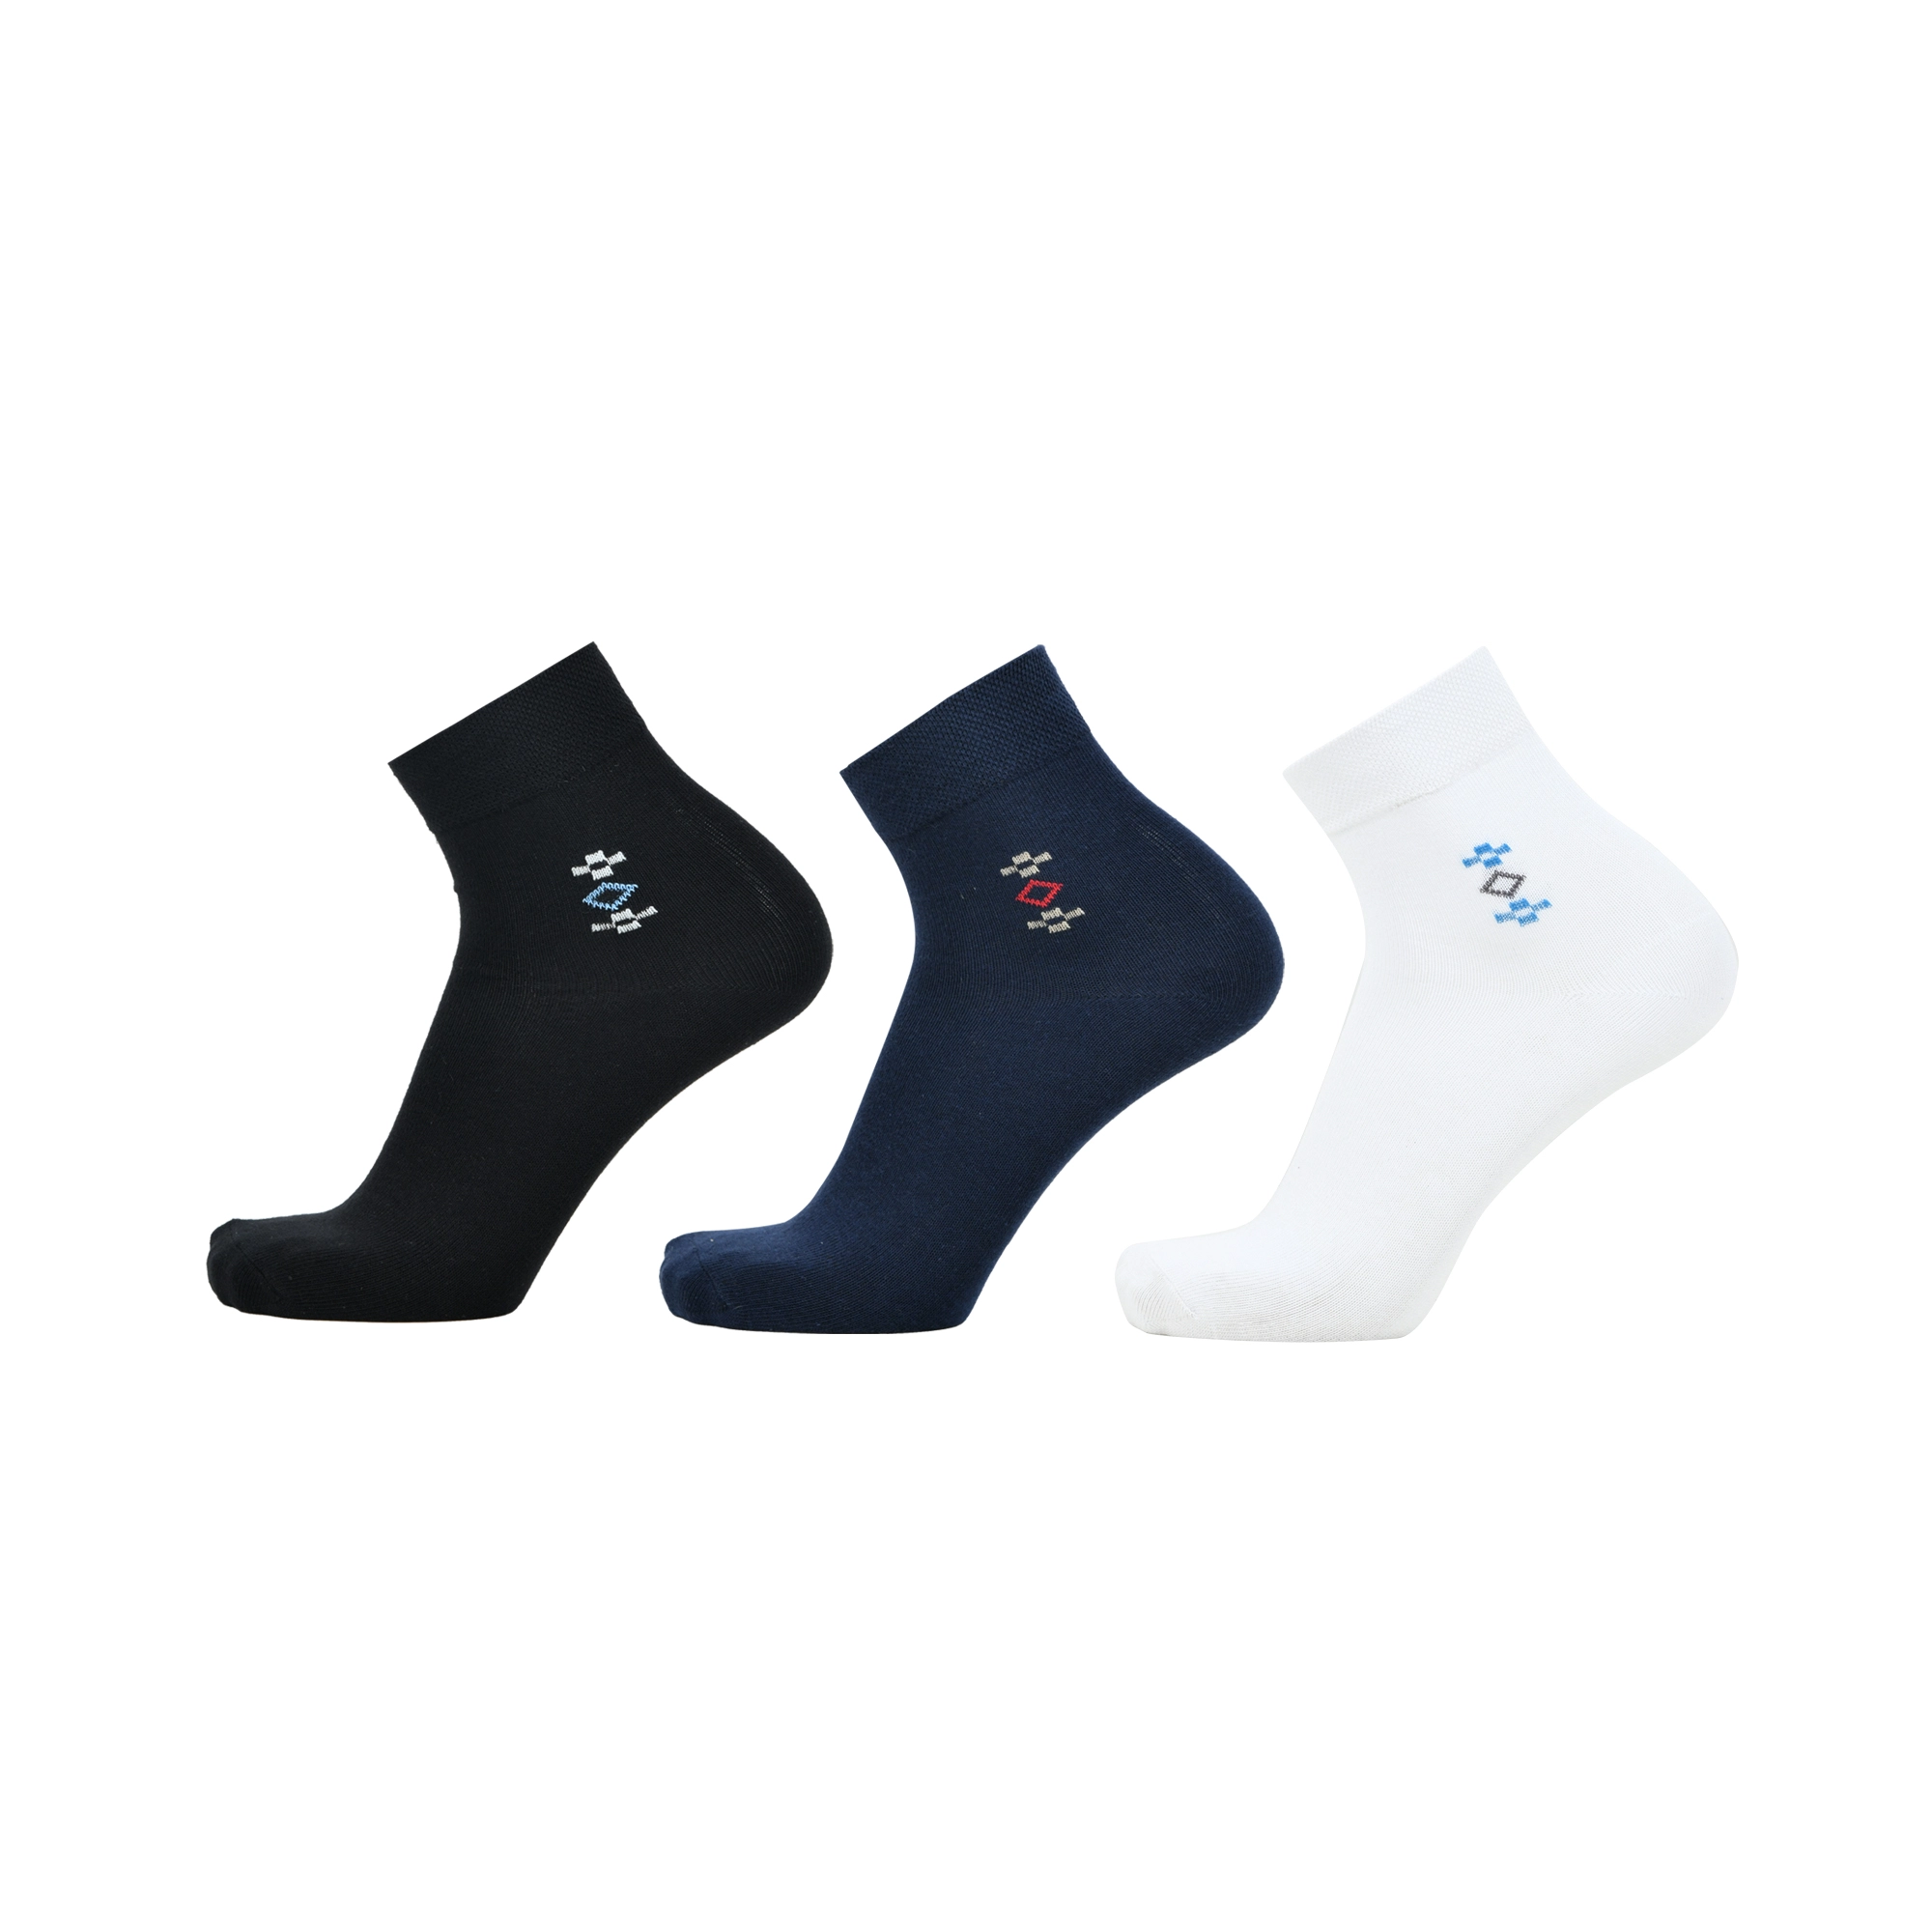 Ankle Length Mens Cotton Socks Price Online India Nepal USA - Buy Ankle ...